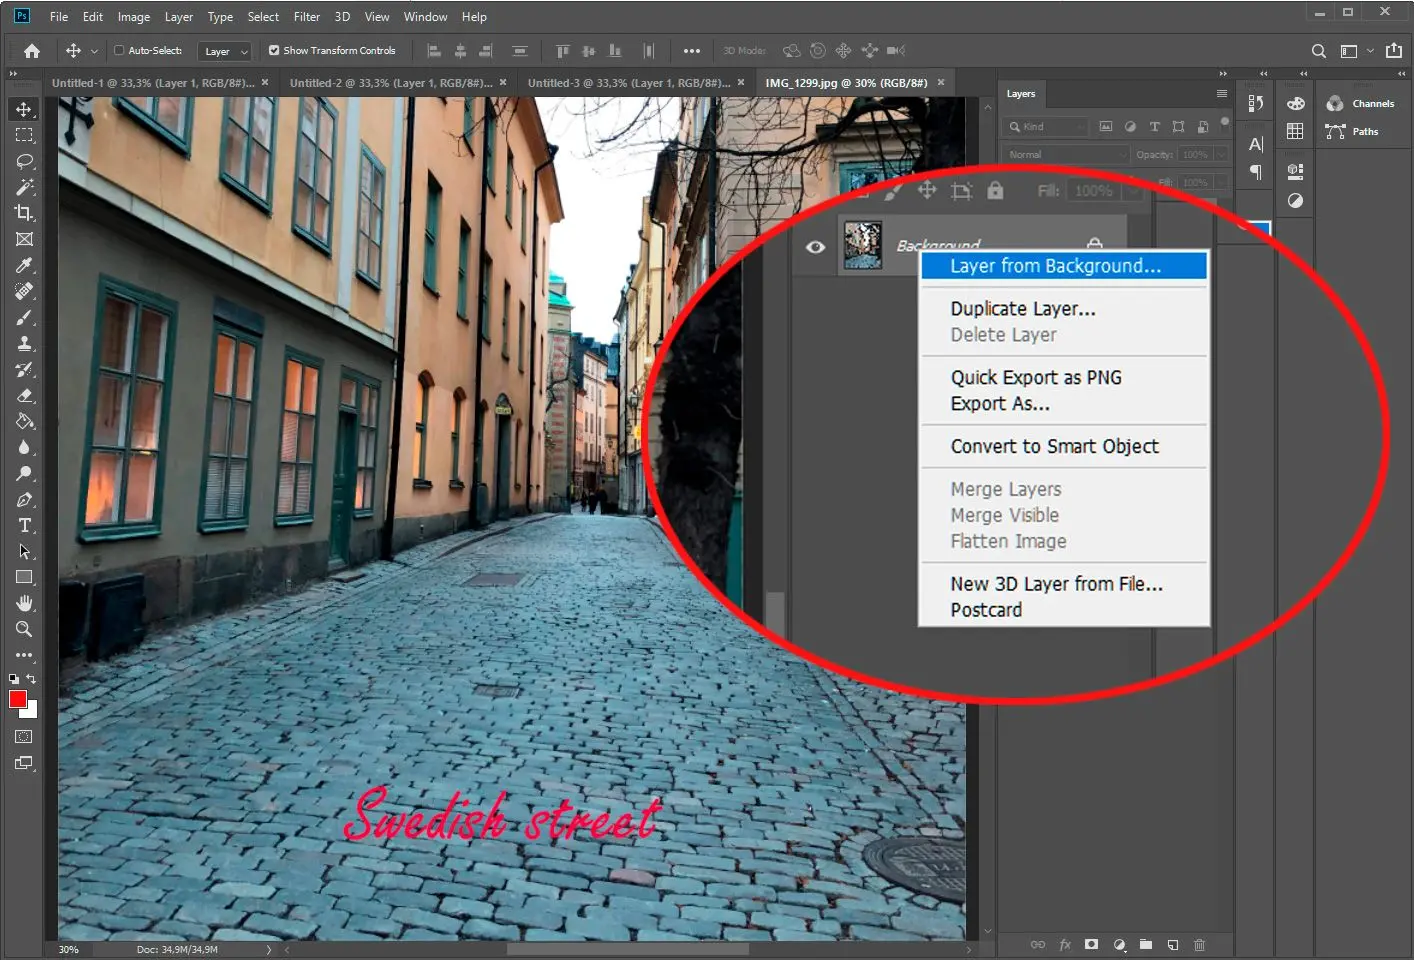 Add file in photoshop..